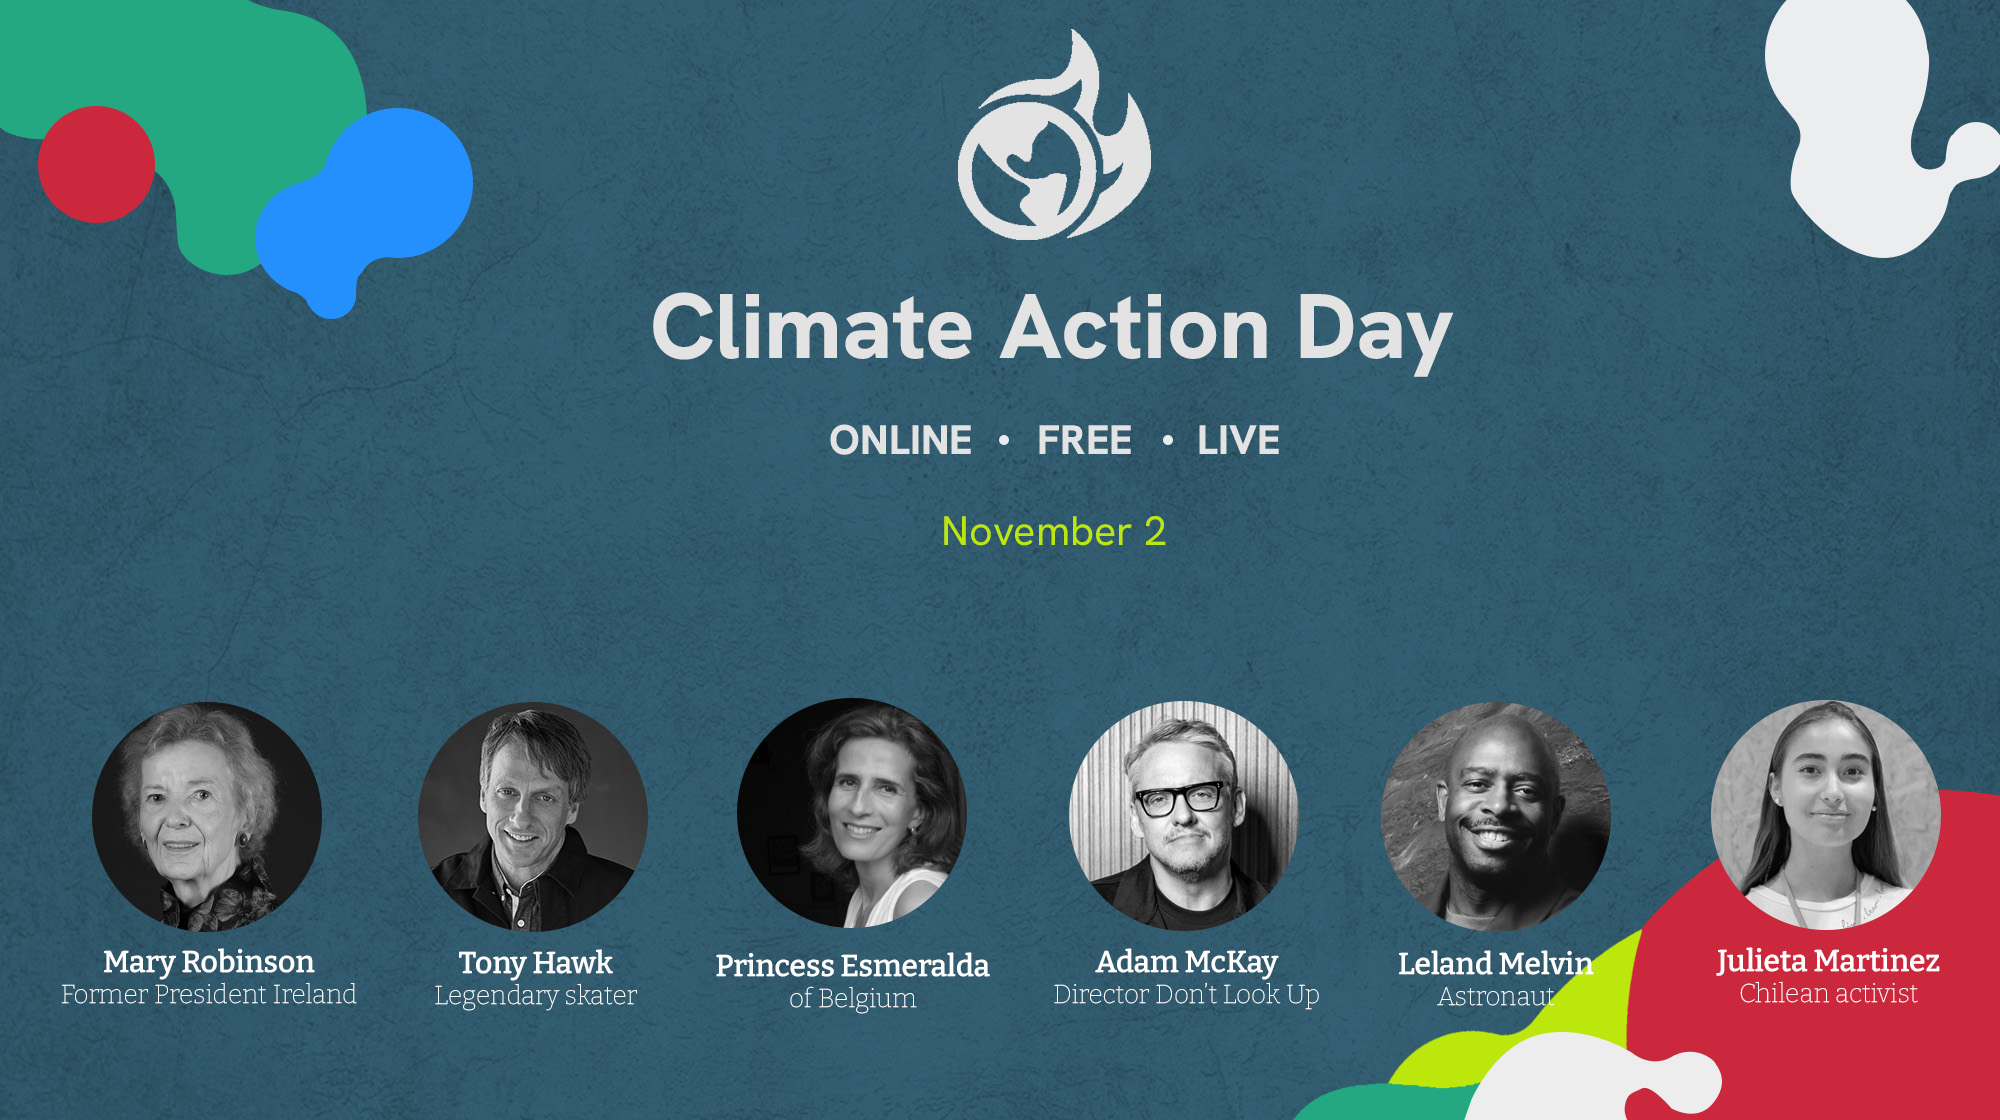 2023 Climate Action Day Event to Take Place on November 2nd